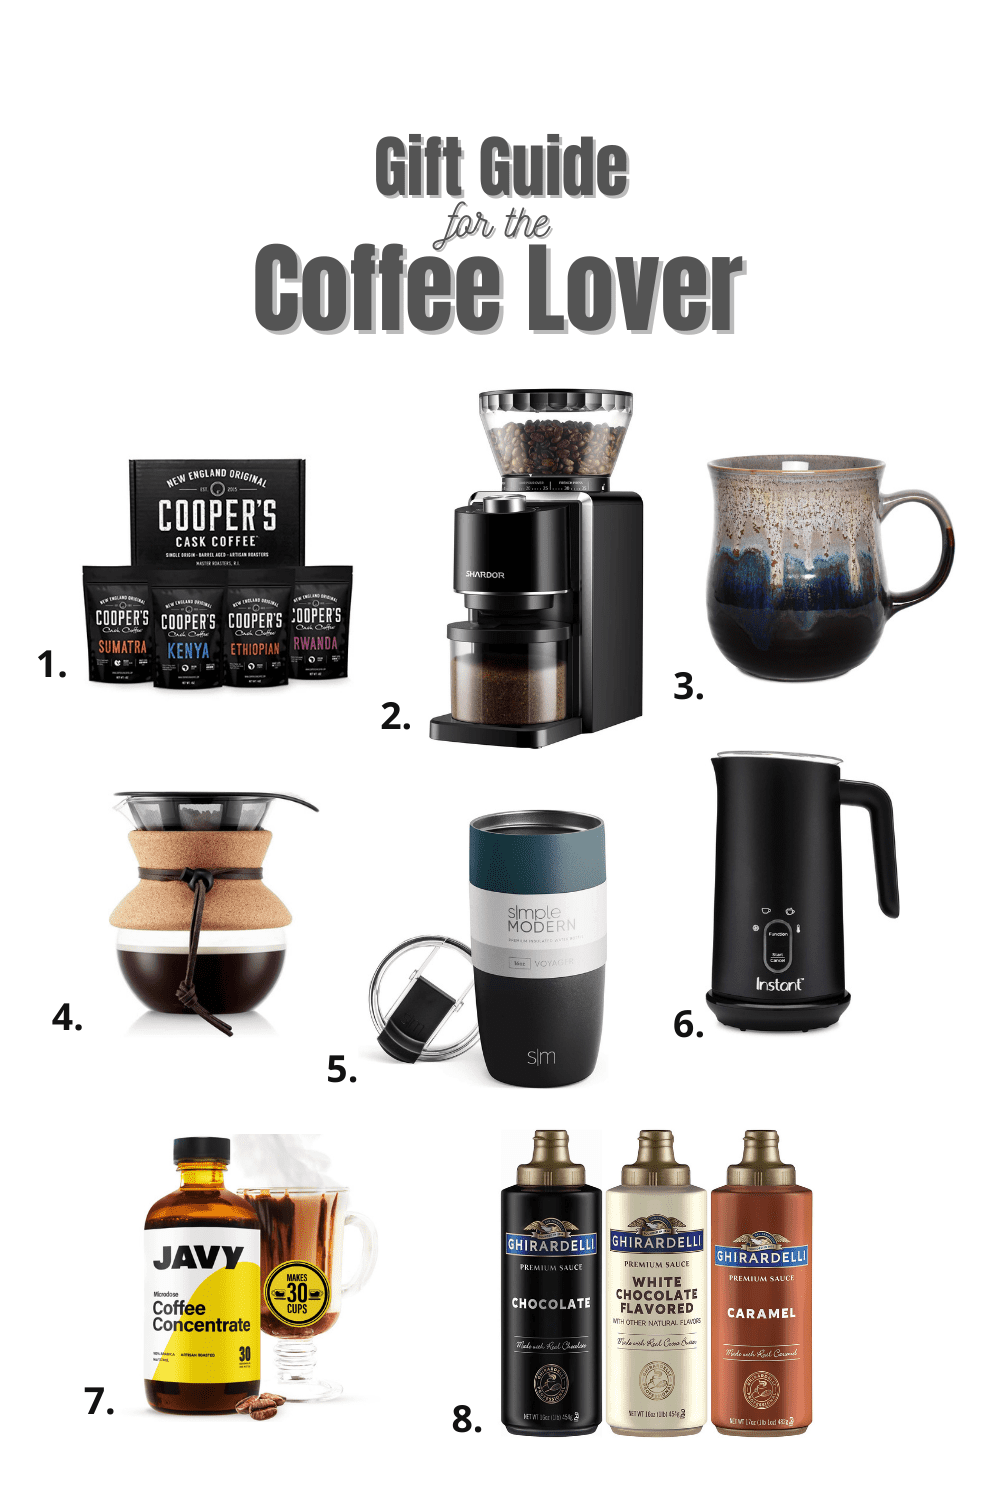 GIft guide for the coffee lover